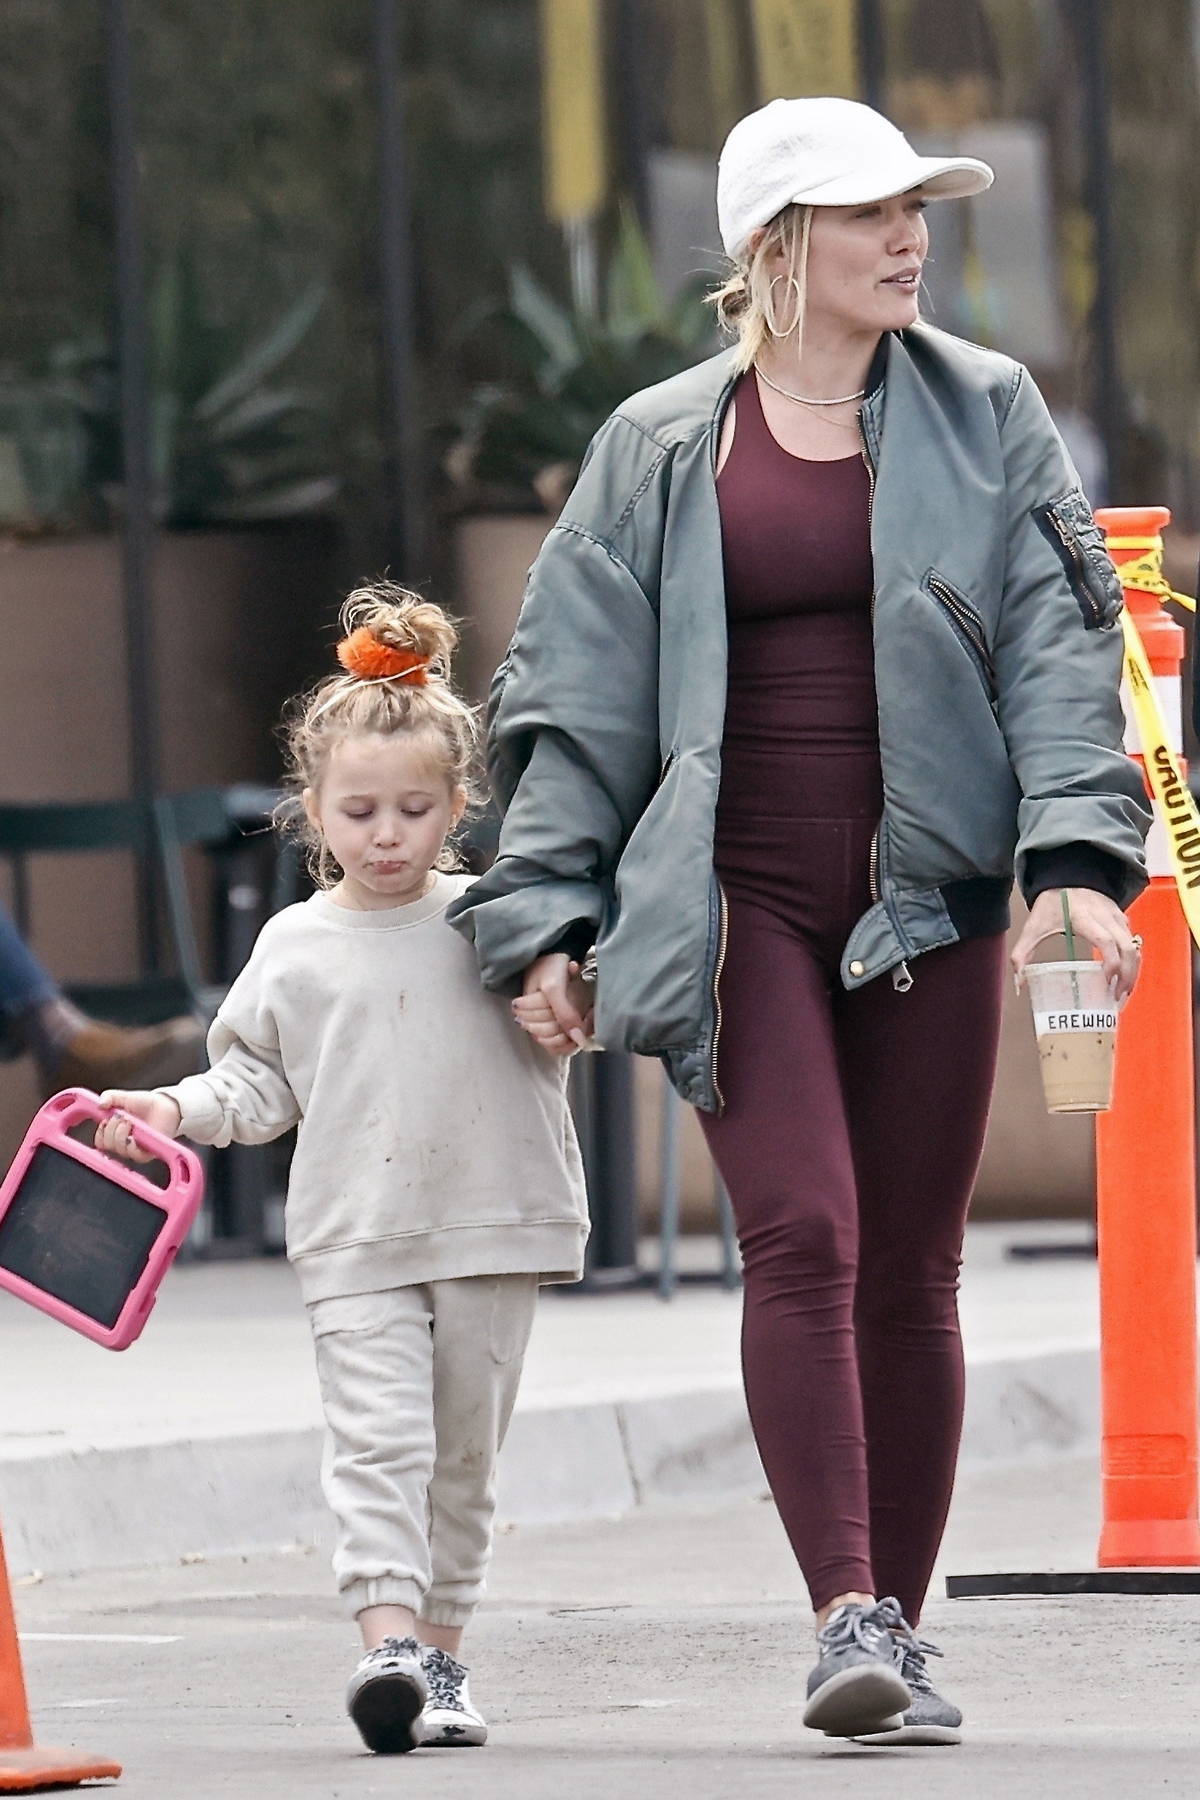 Hilary Duff and Matthew Koma step out with their daughter to pick up groceries at Erewhon in Studio City, California